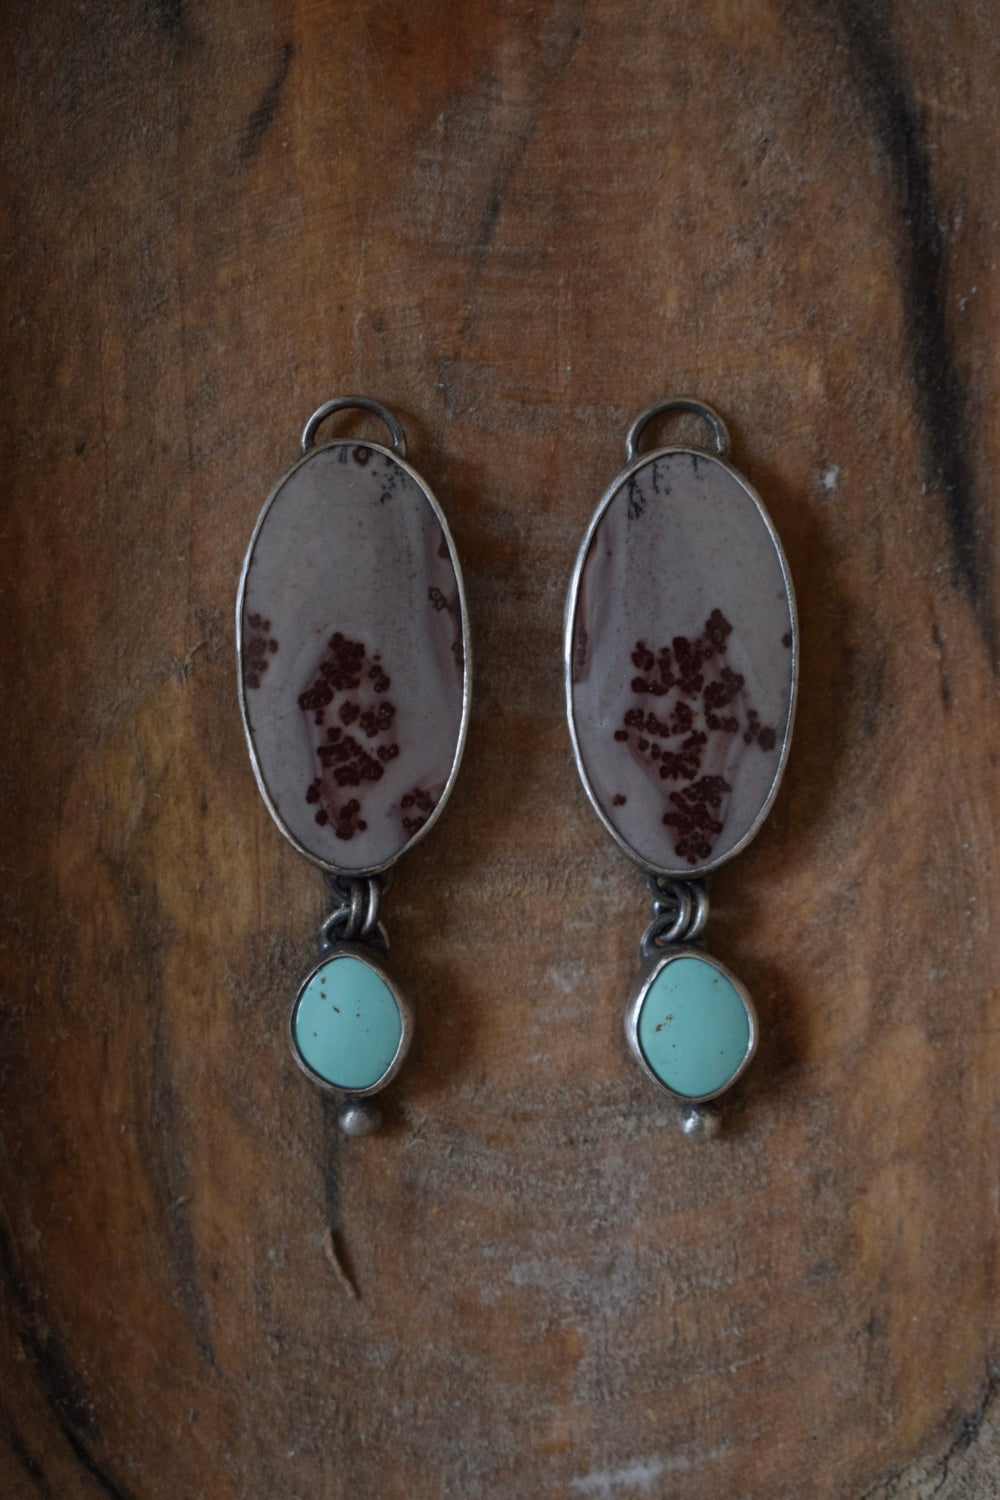 These earrings have two large maroon and grey stones with a marbled print, below them hangs light green turquoise dangles with small silver dot accents.